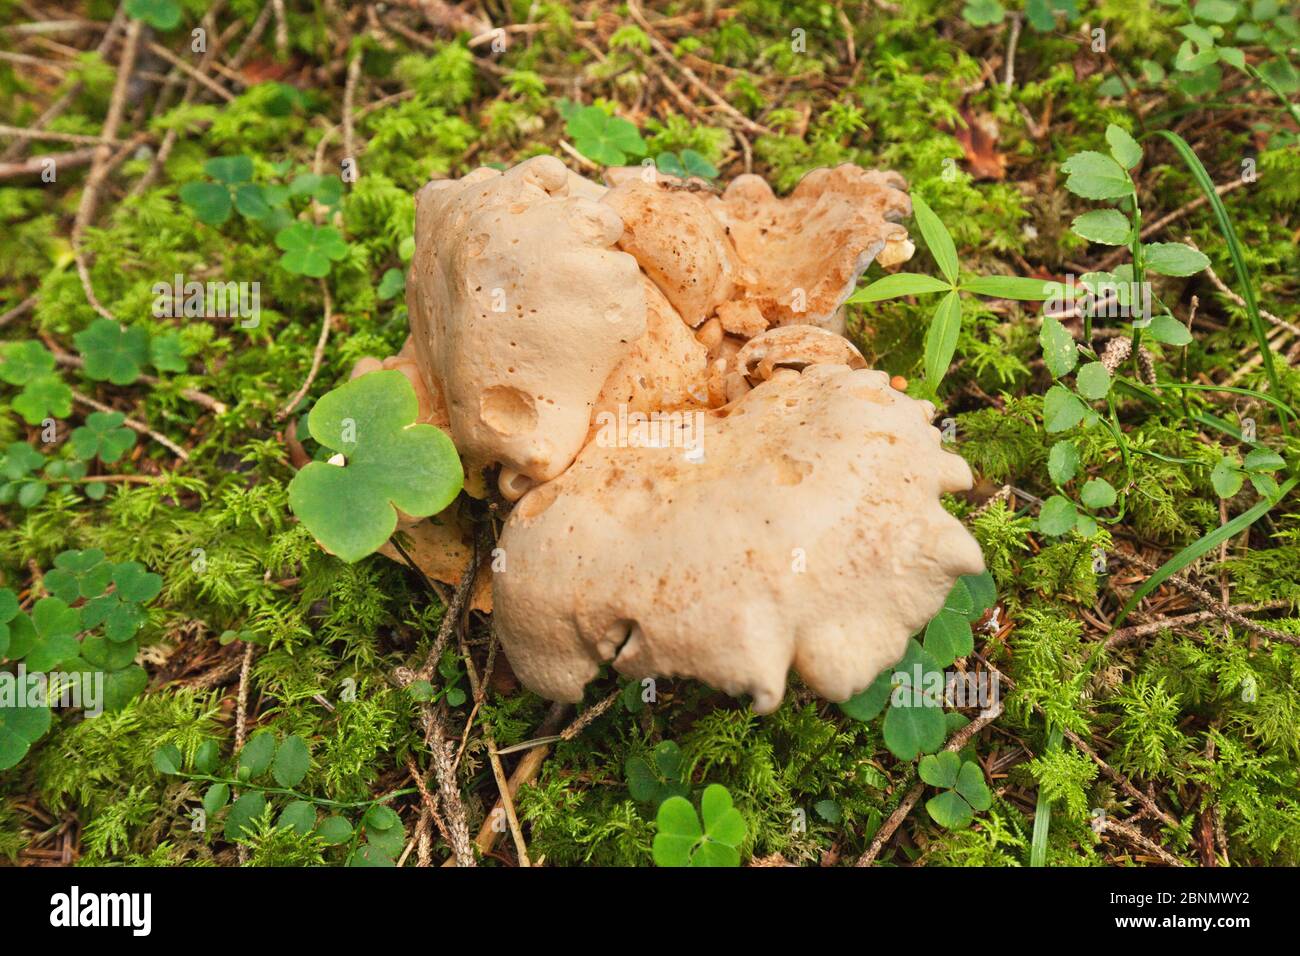 inedible unknown mushroom on forest floor covered with moss Stock Photo